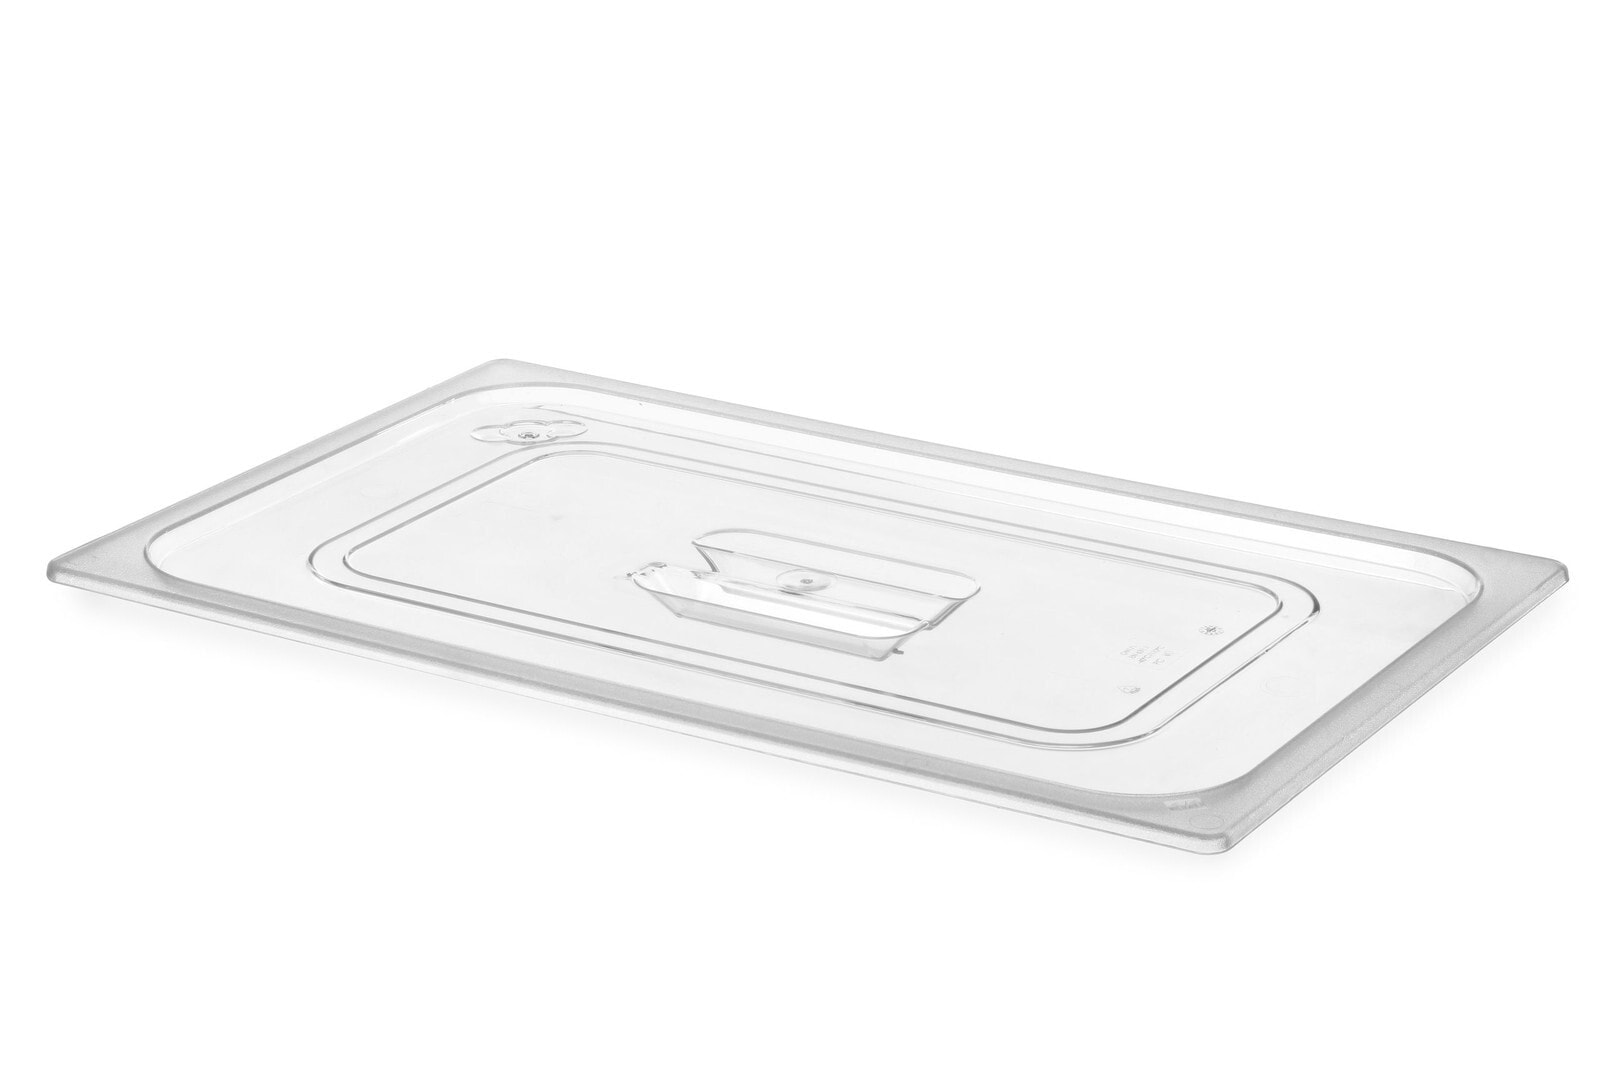 Polycarbonate lid for GN 1/1 containers - Hendi 864104